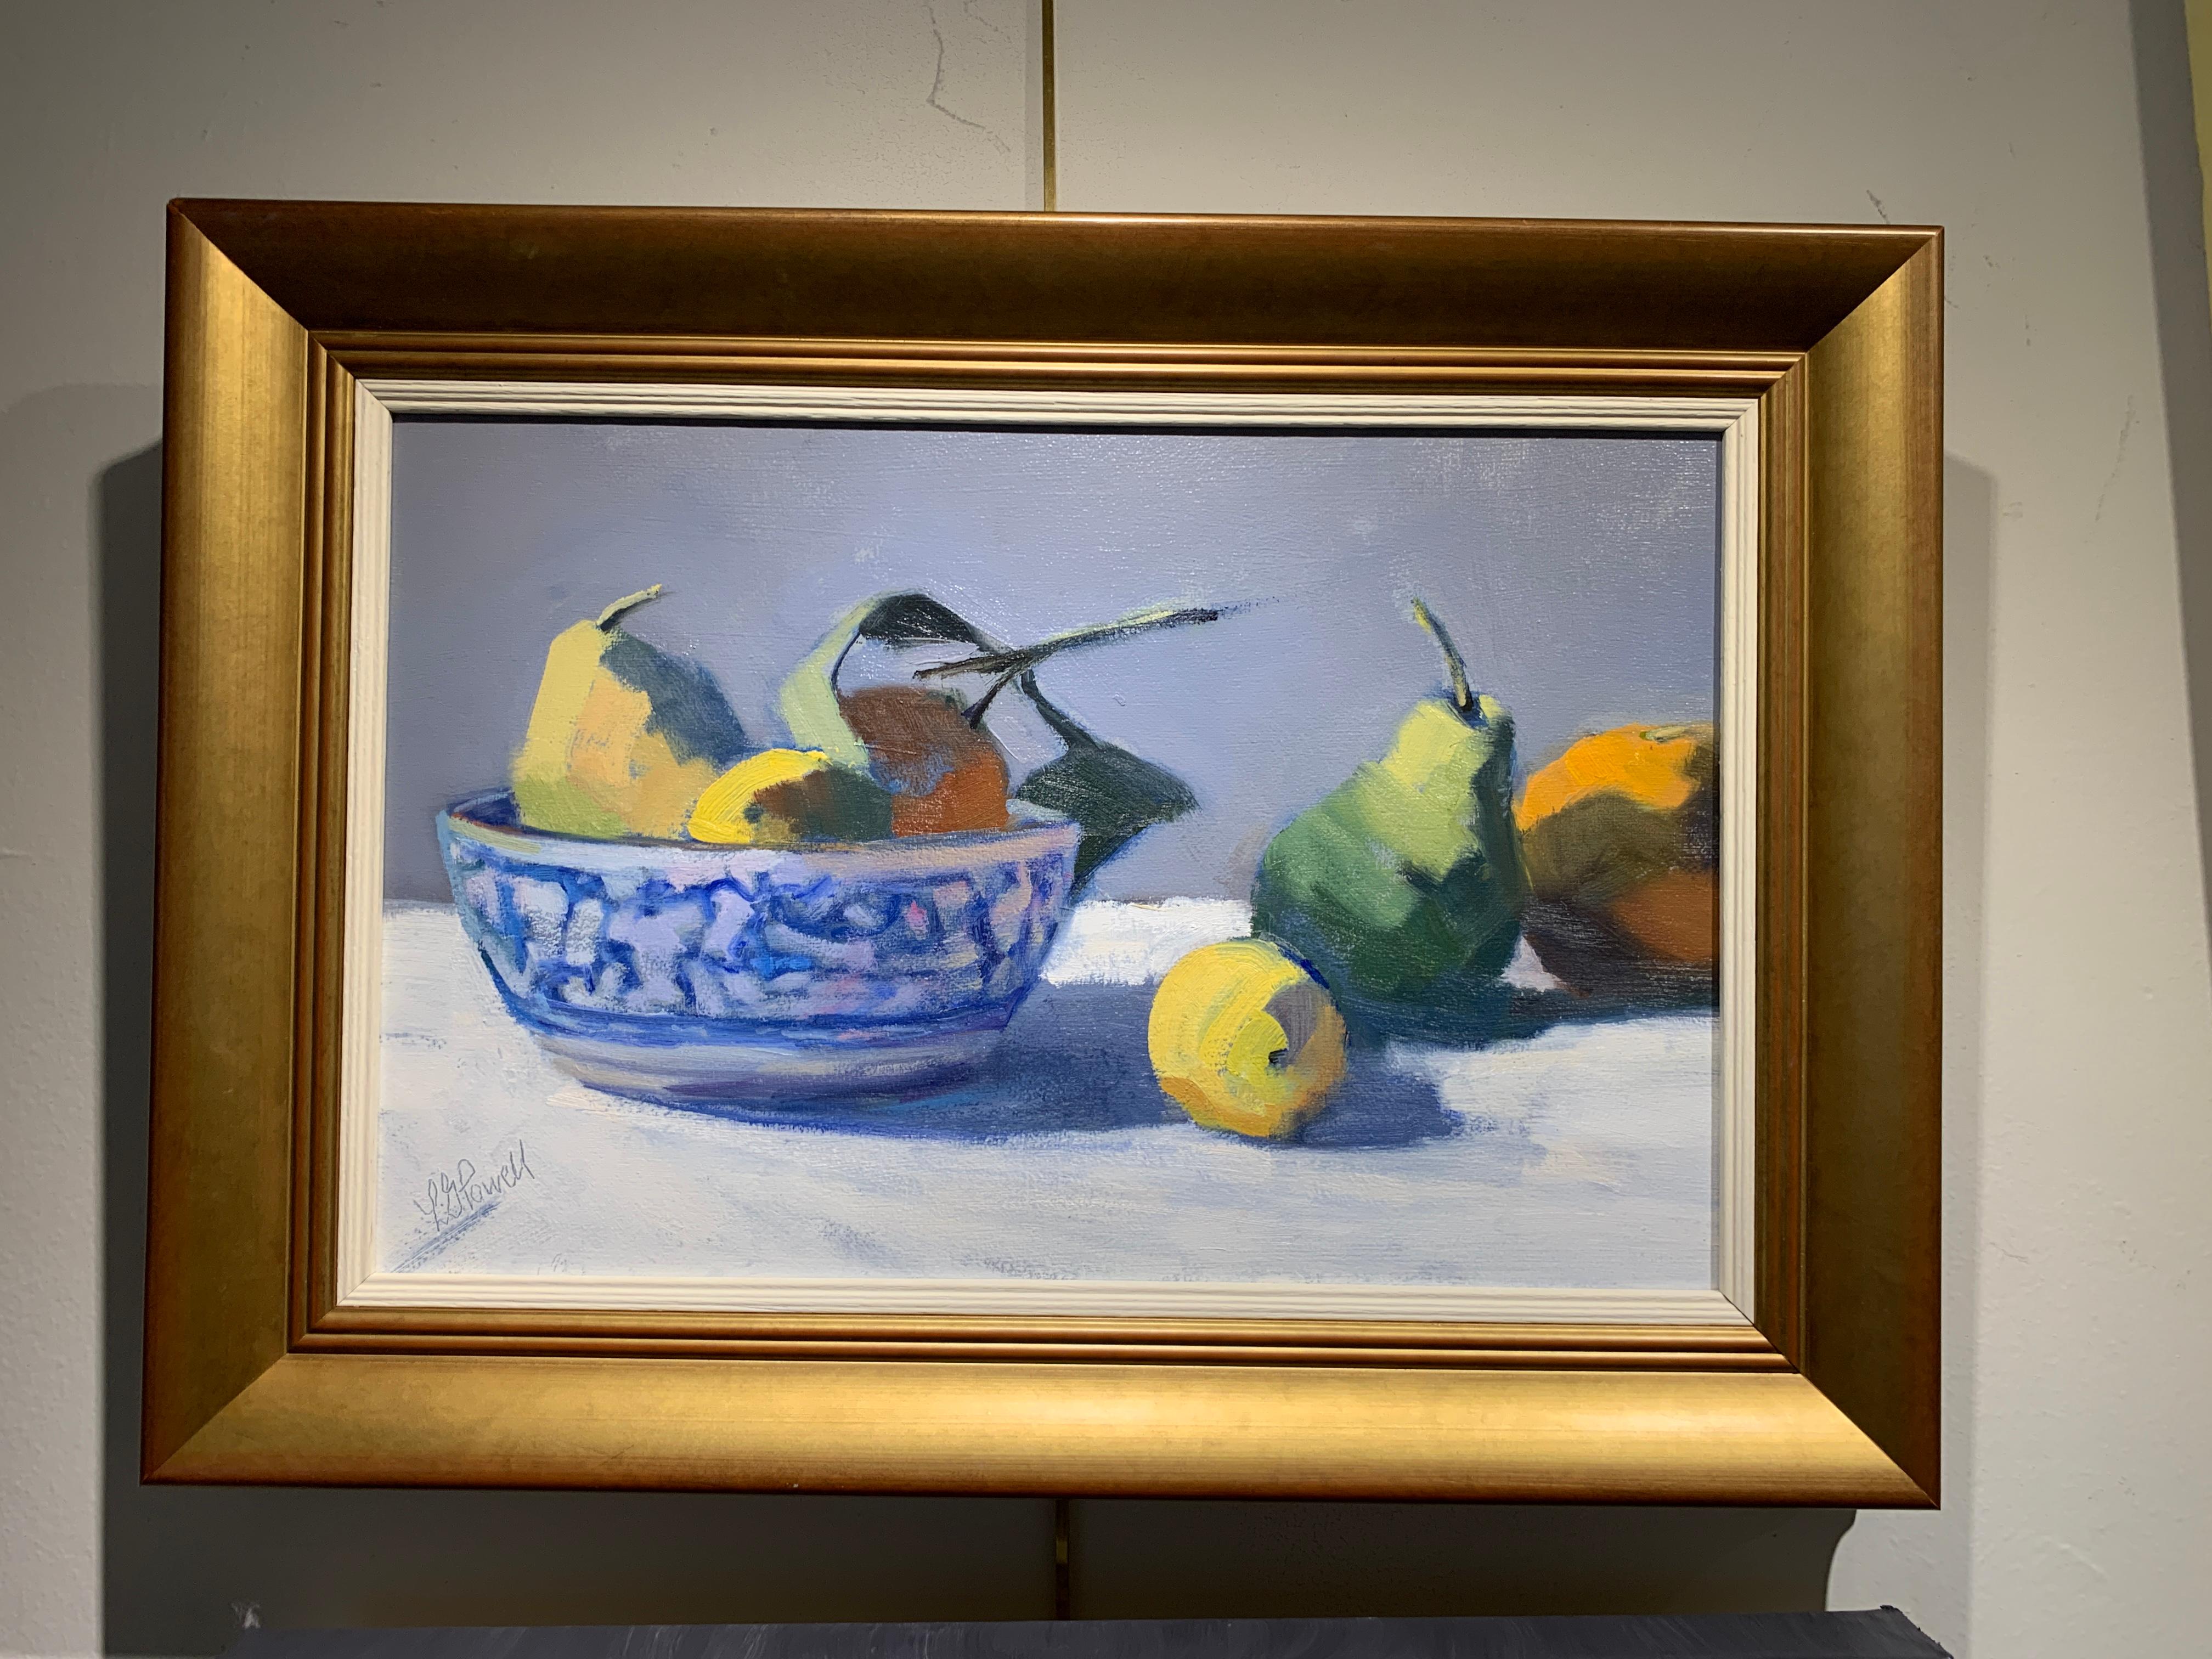 Fruit and Bowl by Lesley Powell, Small Framed Post-Impressionist Oil Painting 1